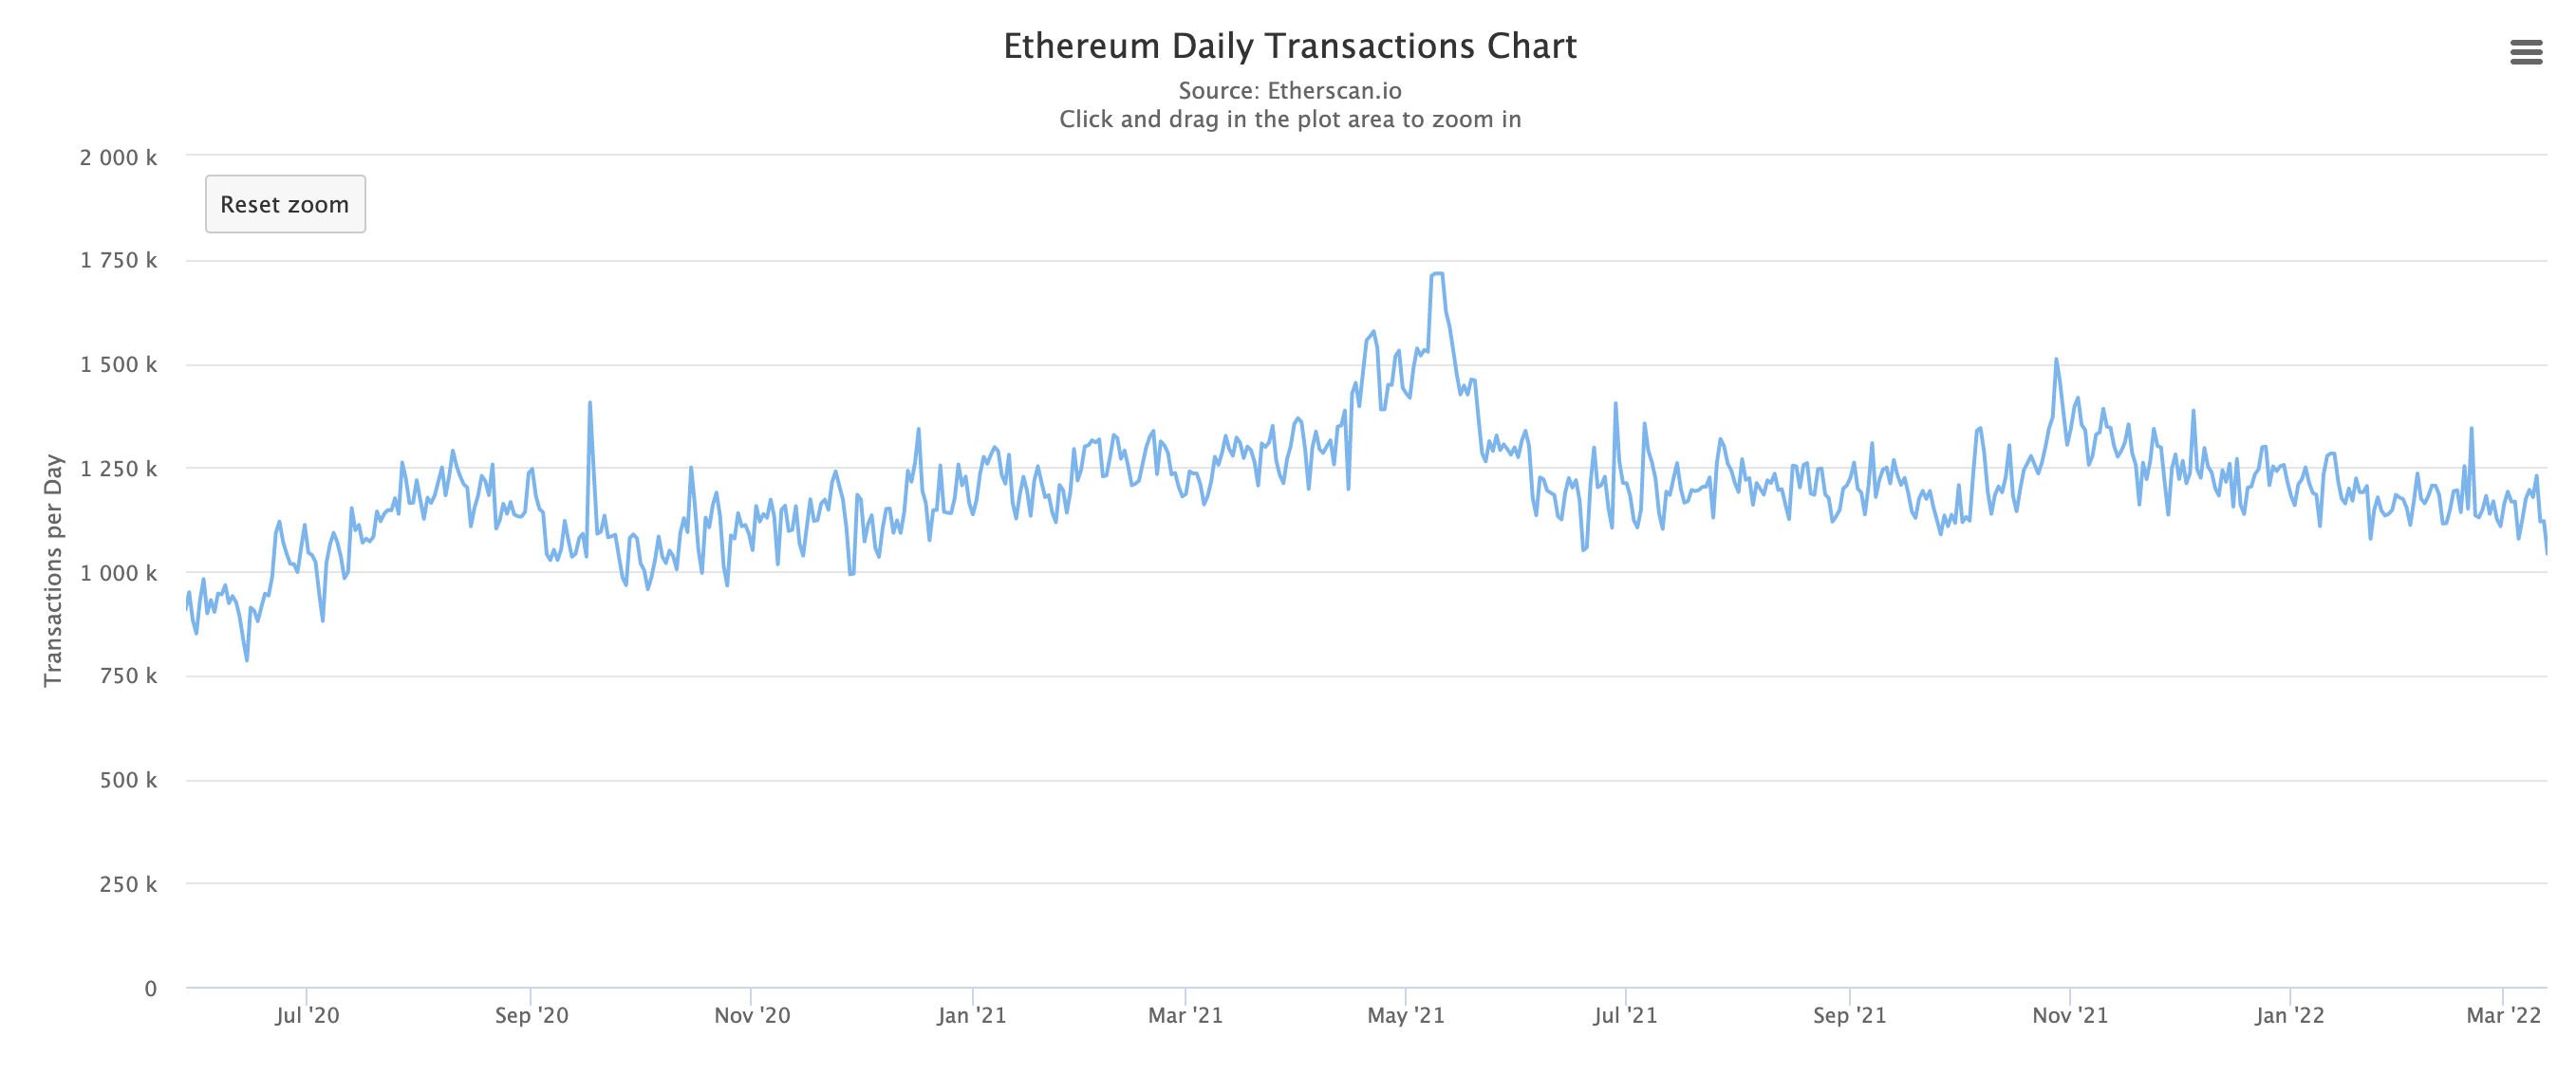 Ethereum number of daily transactions